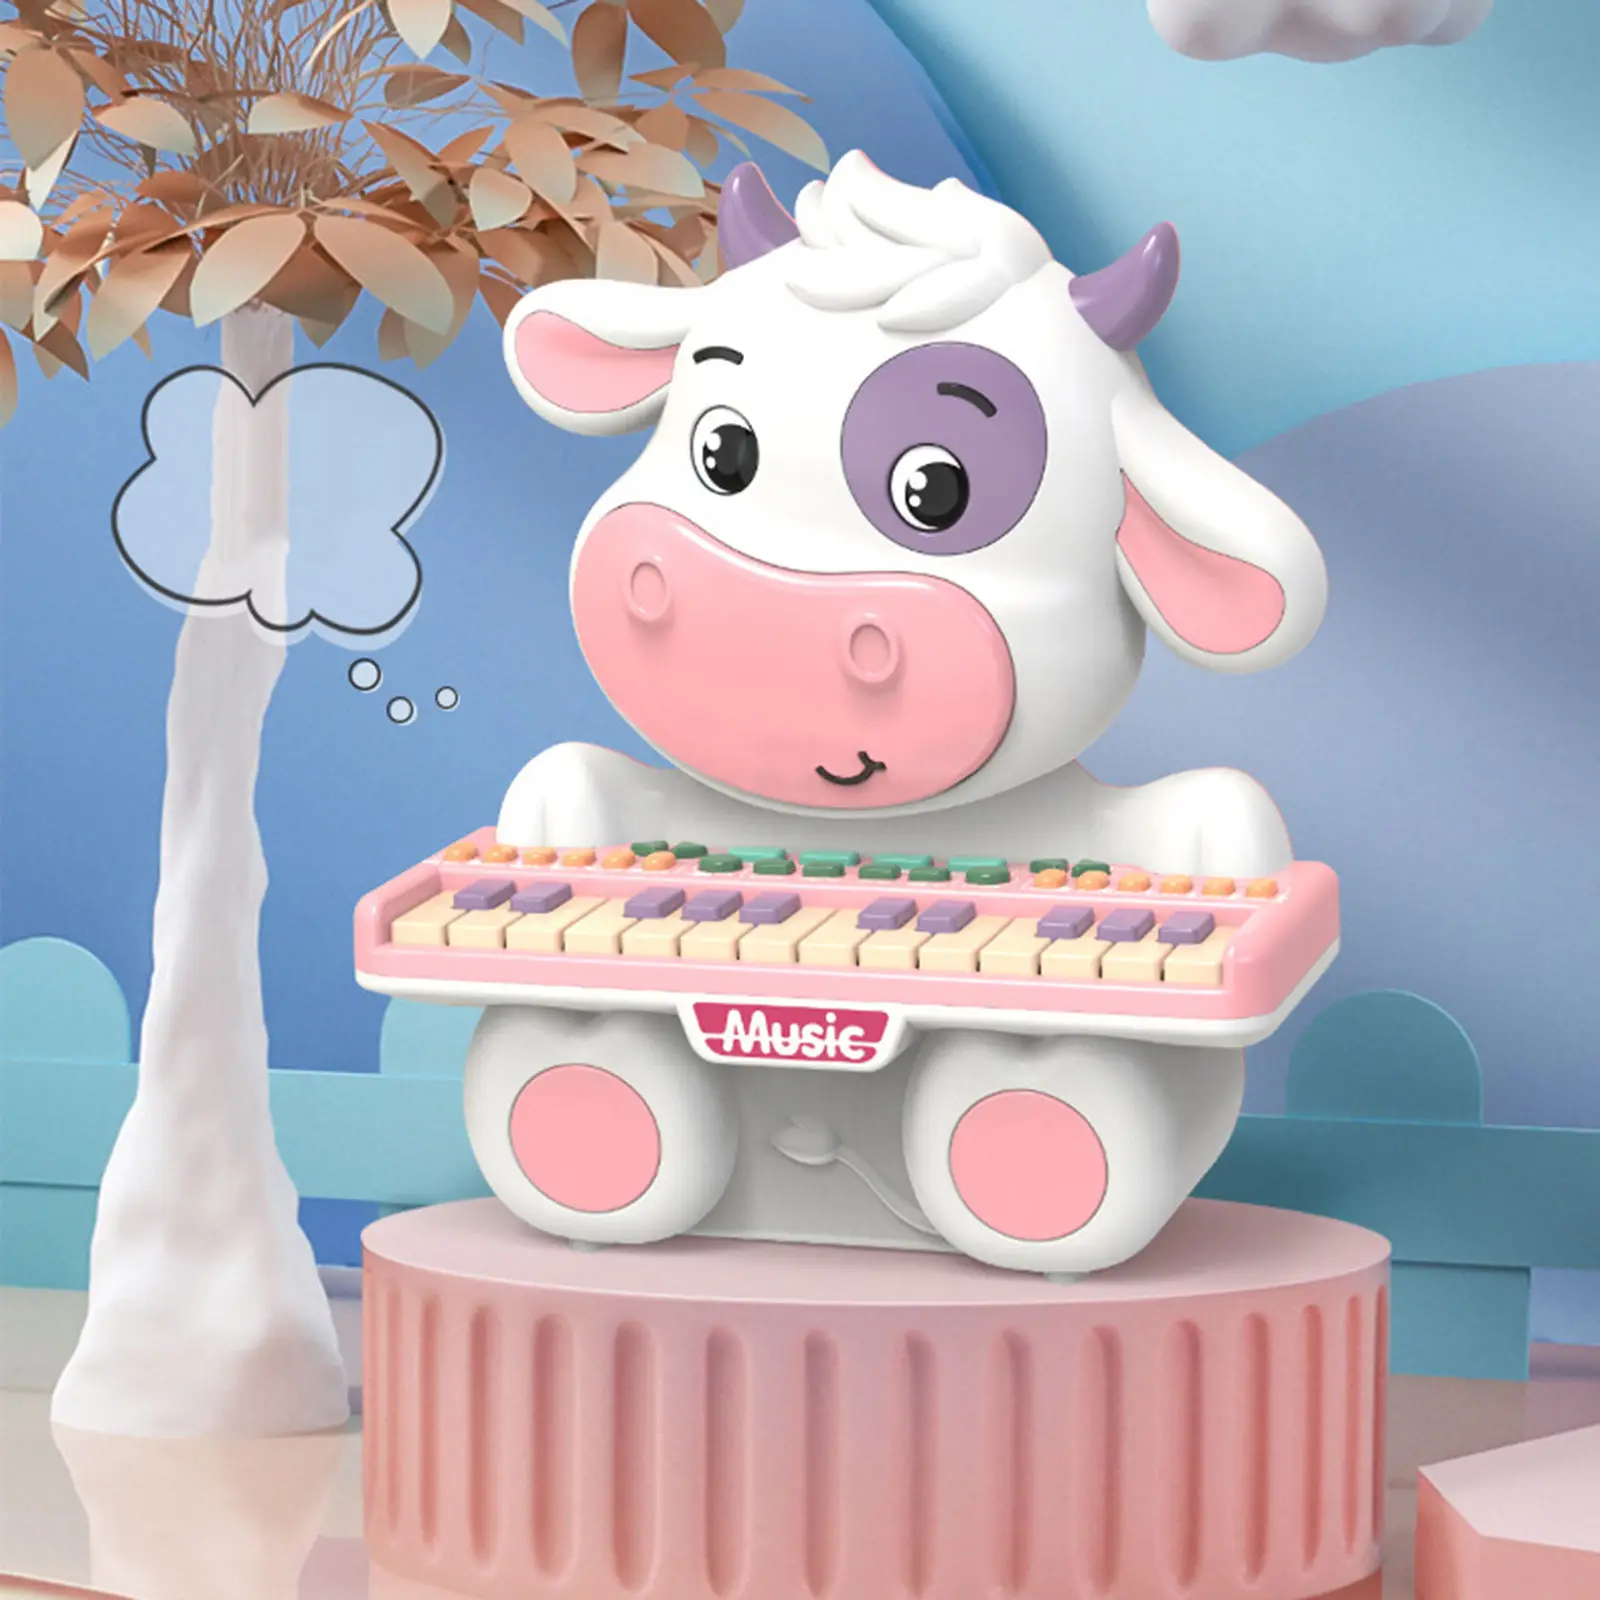 

The Music Piano Toy 24 Keys Attracts Children's Attention to